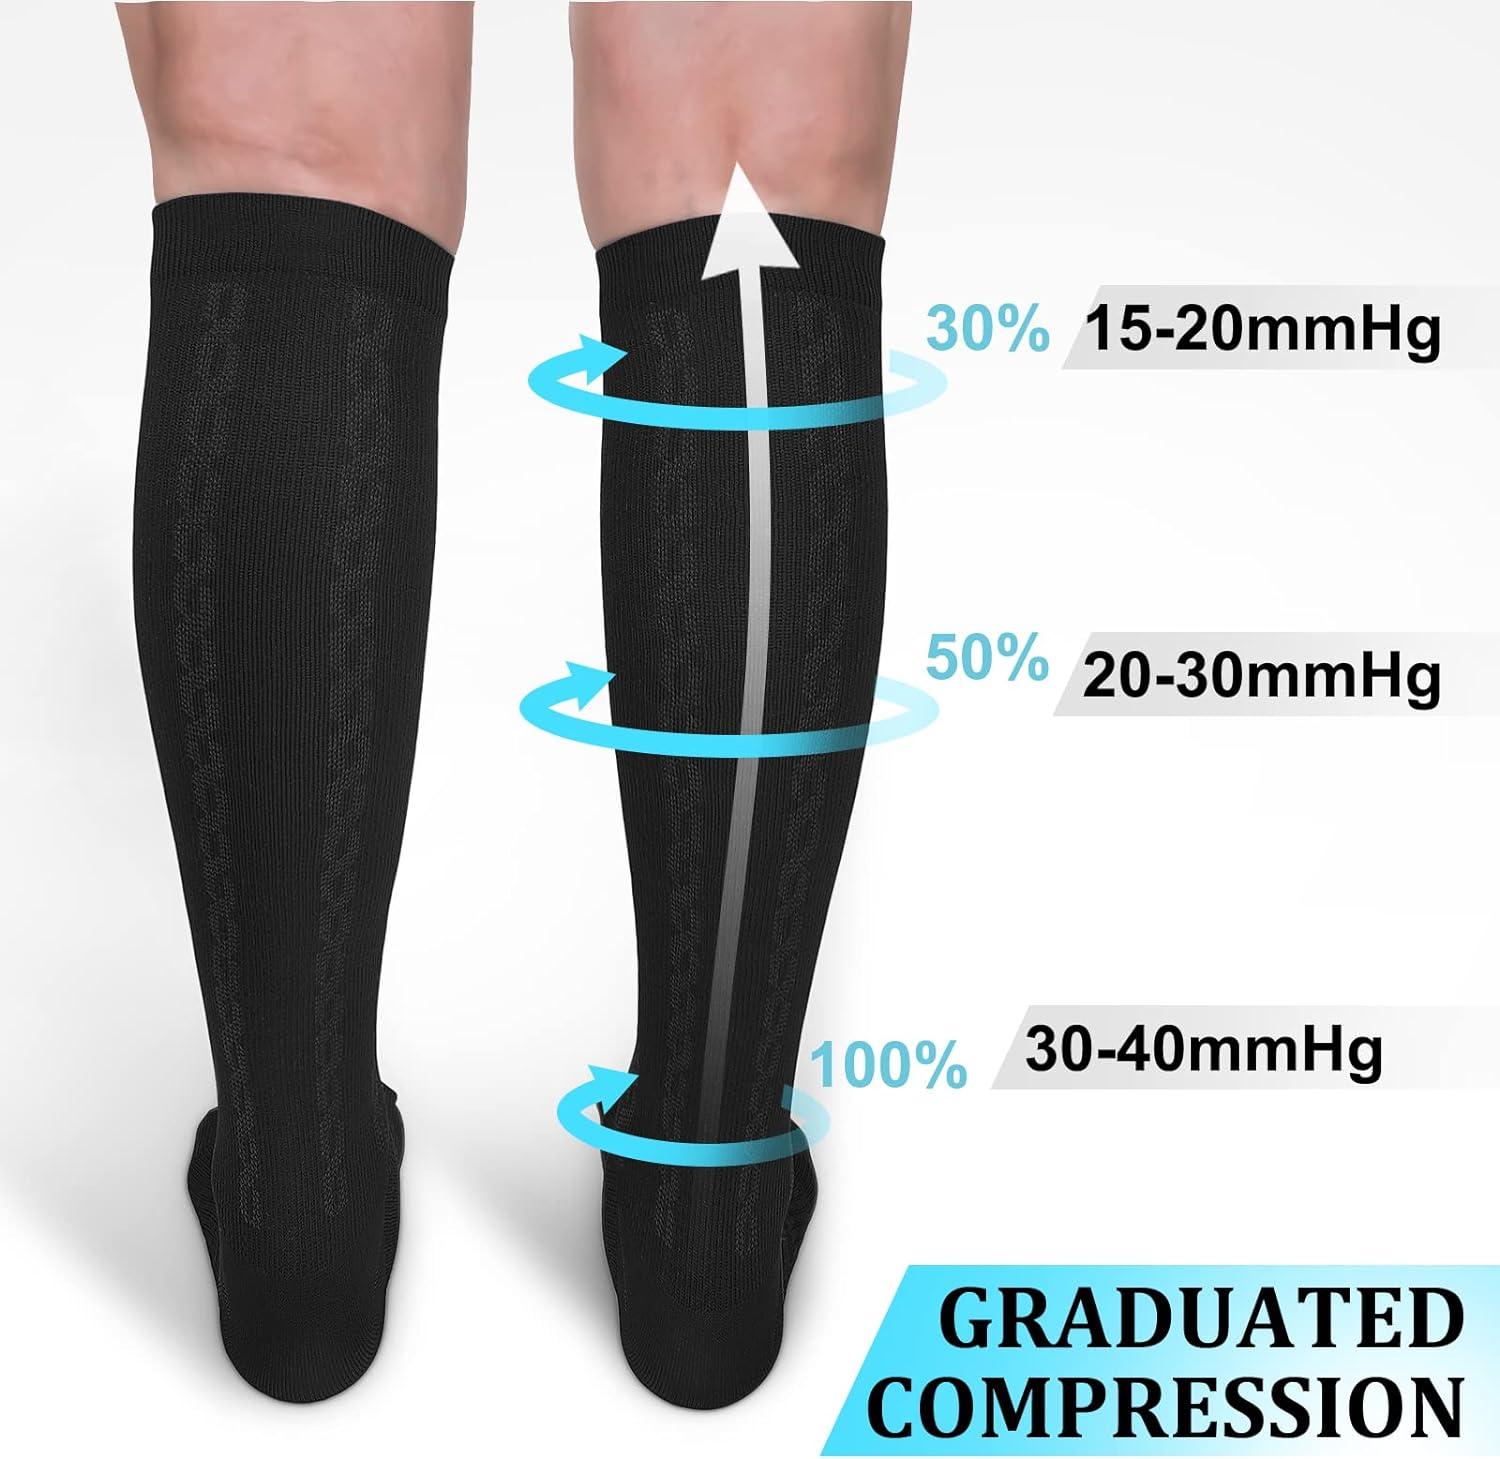 30-40mmHg Medical Graduated Compression Socks for Women&Men Circulation- Compression Stockings-Knee High Socks for Support Hiking Running 1-2 Pack  Black Large-X-Large